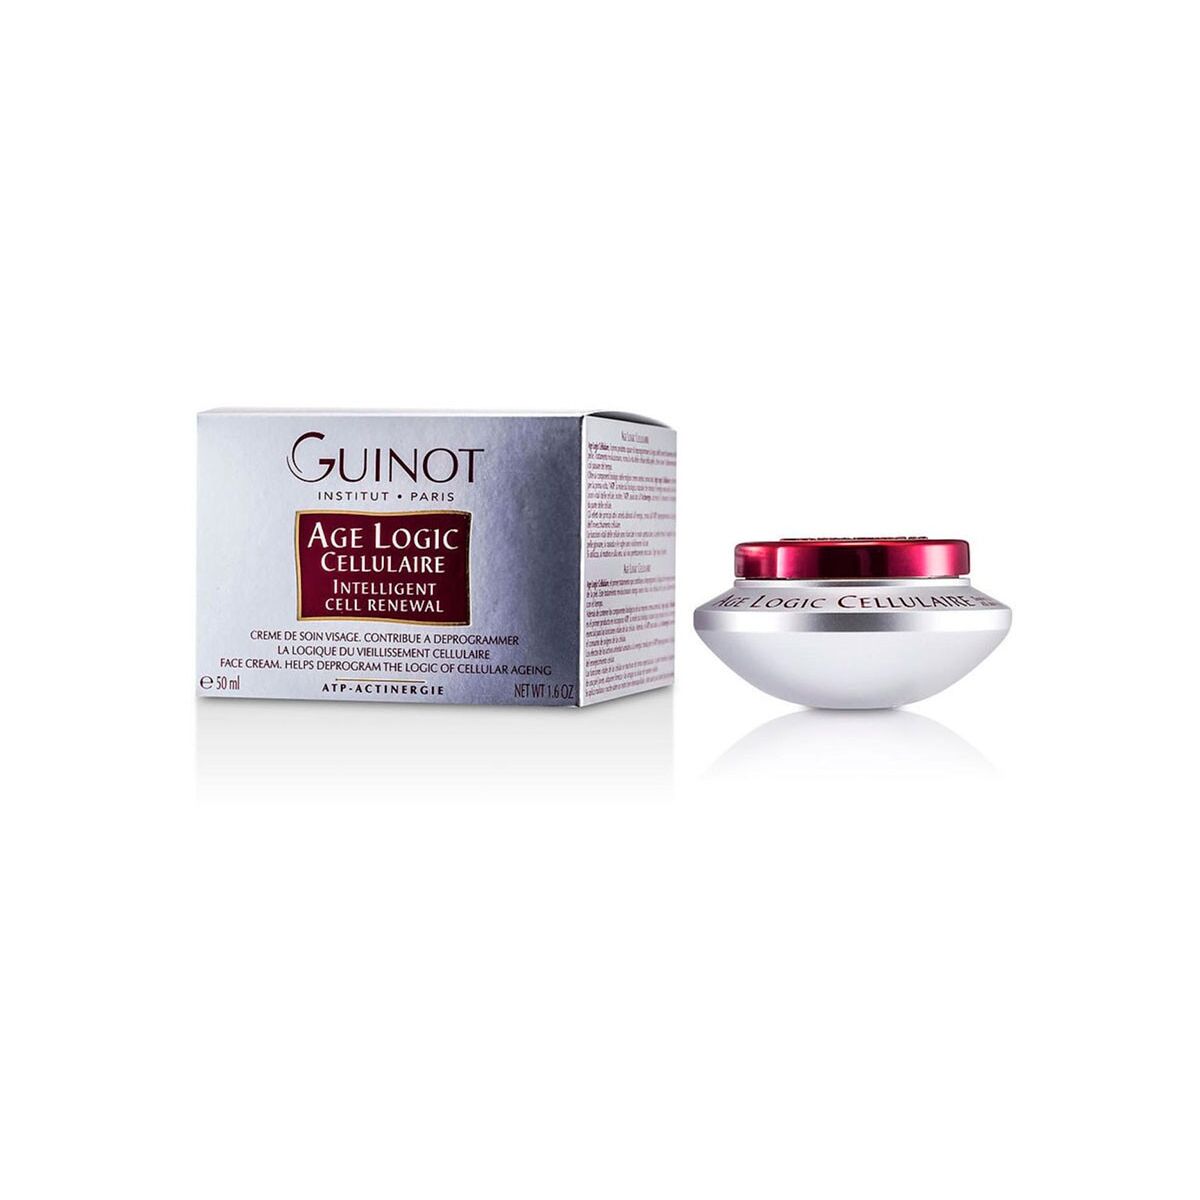 Gesichtscreme Guinot Age Logic Cellulaire 50 ml